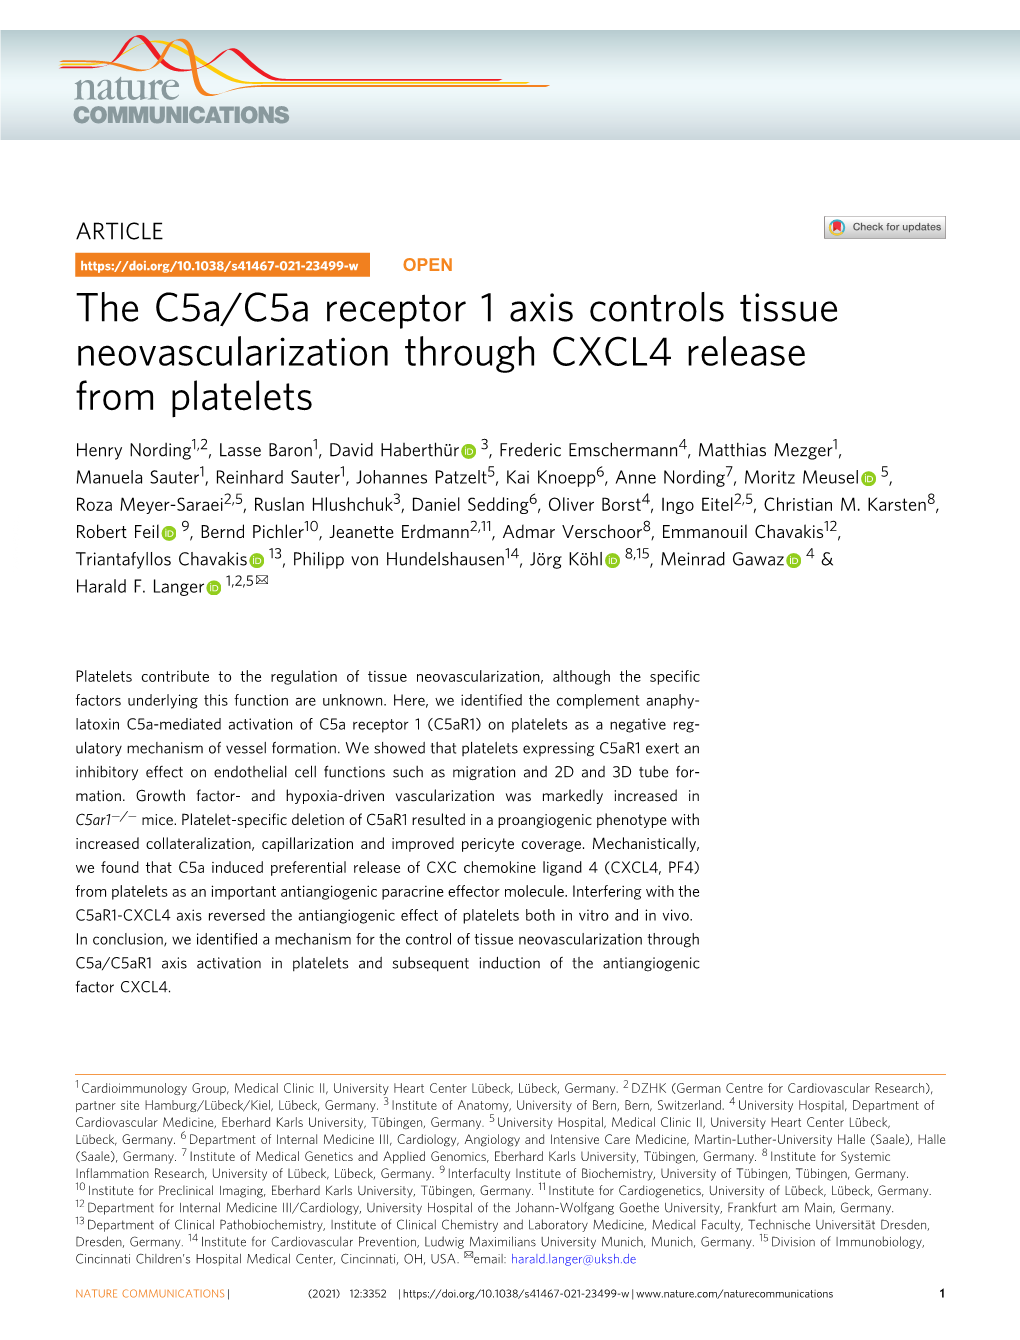 The C5a/C5a Receptor 1 Axis Controls Tissue Neovascularization Through CXCL4 Release from Platelets